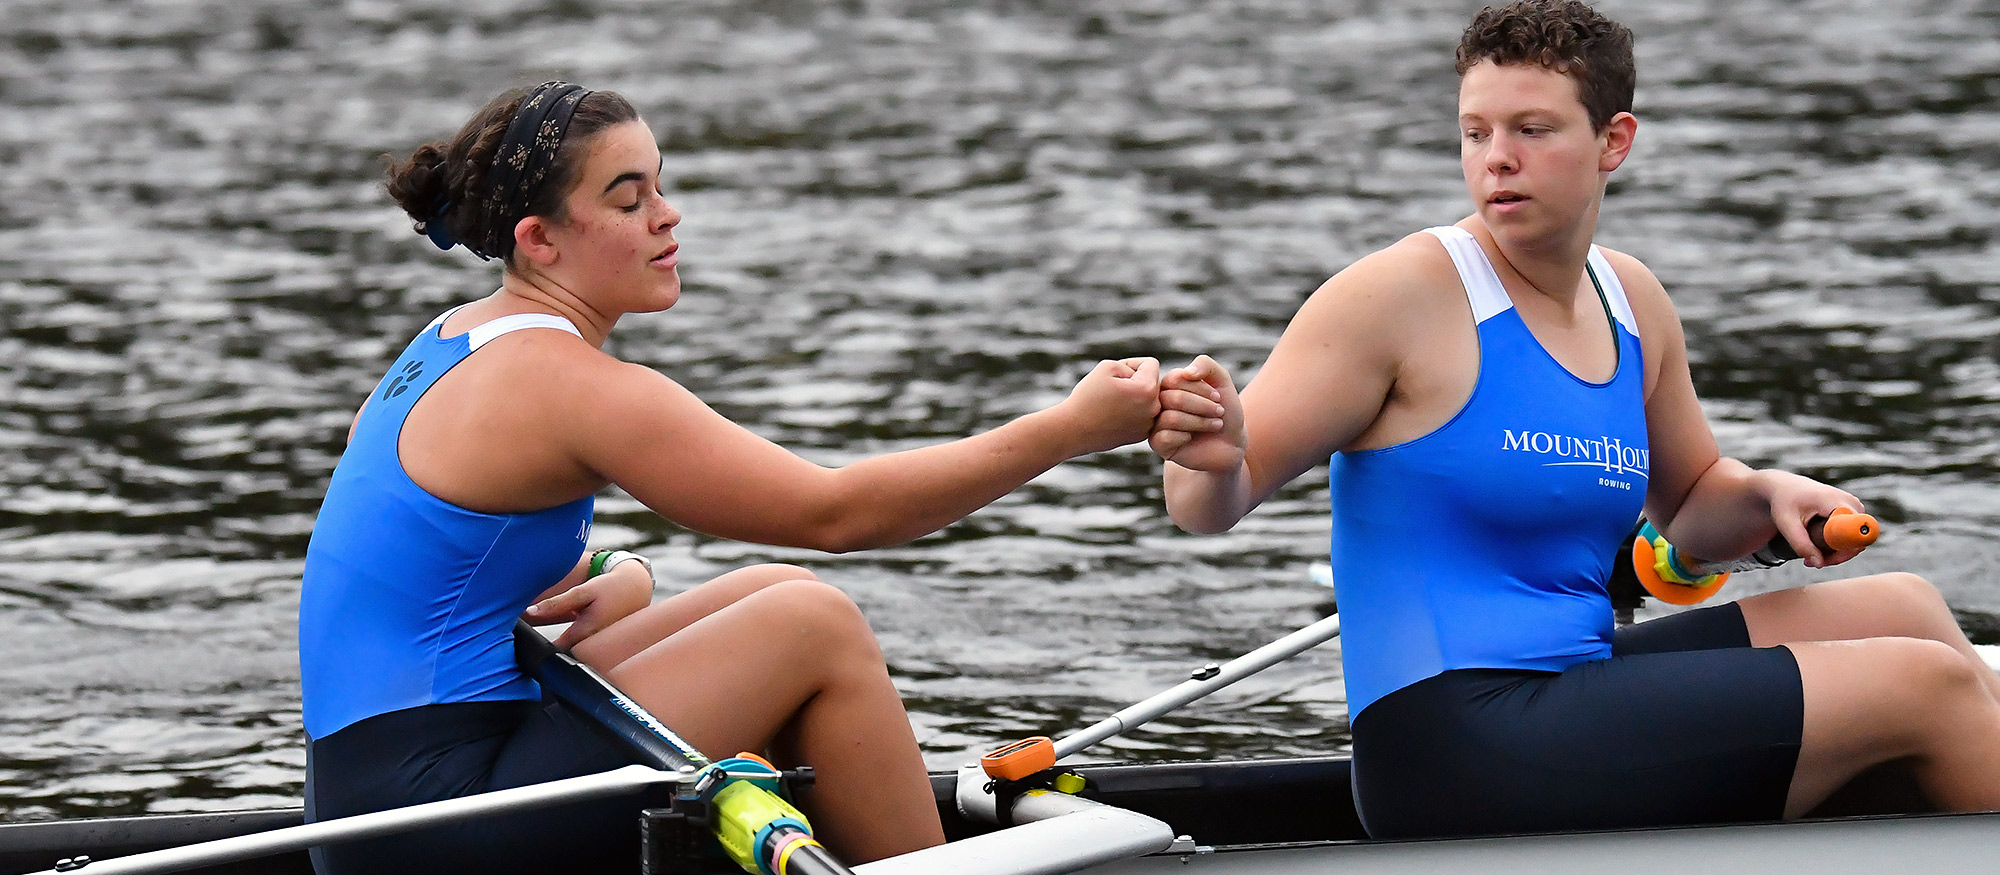 Liv Romanowsky (left) and Jocelyn Greer (right) helped their Mount Holyoke boat to finish first in their season-opening race at the Head of the Hudson on Sept. 18, 2022. (RJB Sports file photo)